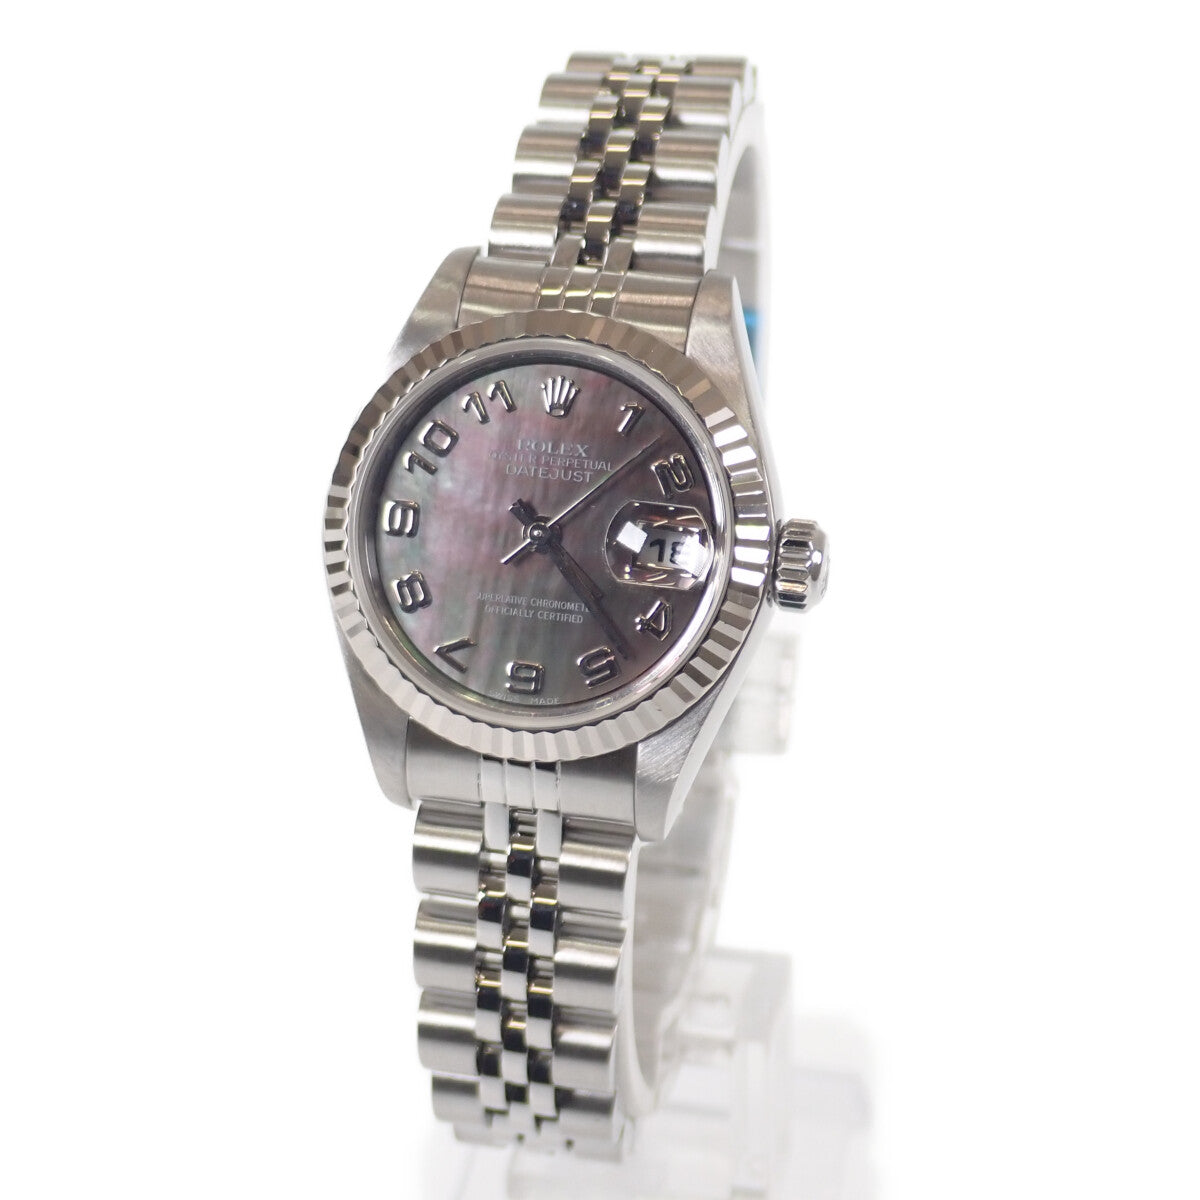 ROLEX Datejust Ladies Wristwatch 79174NA in Black Dial, Stainless Steel/18K White Gold, ROLEX Preowned 79174NA